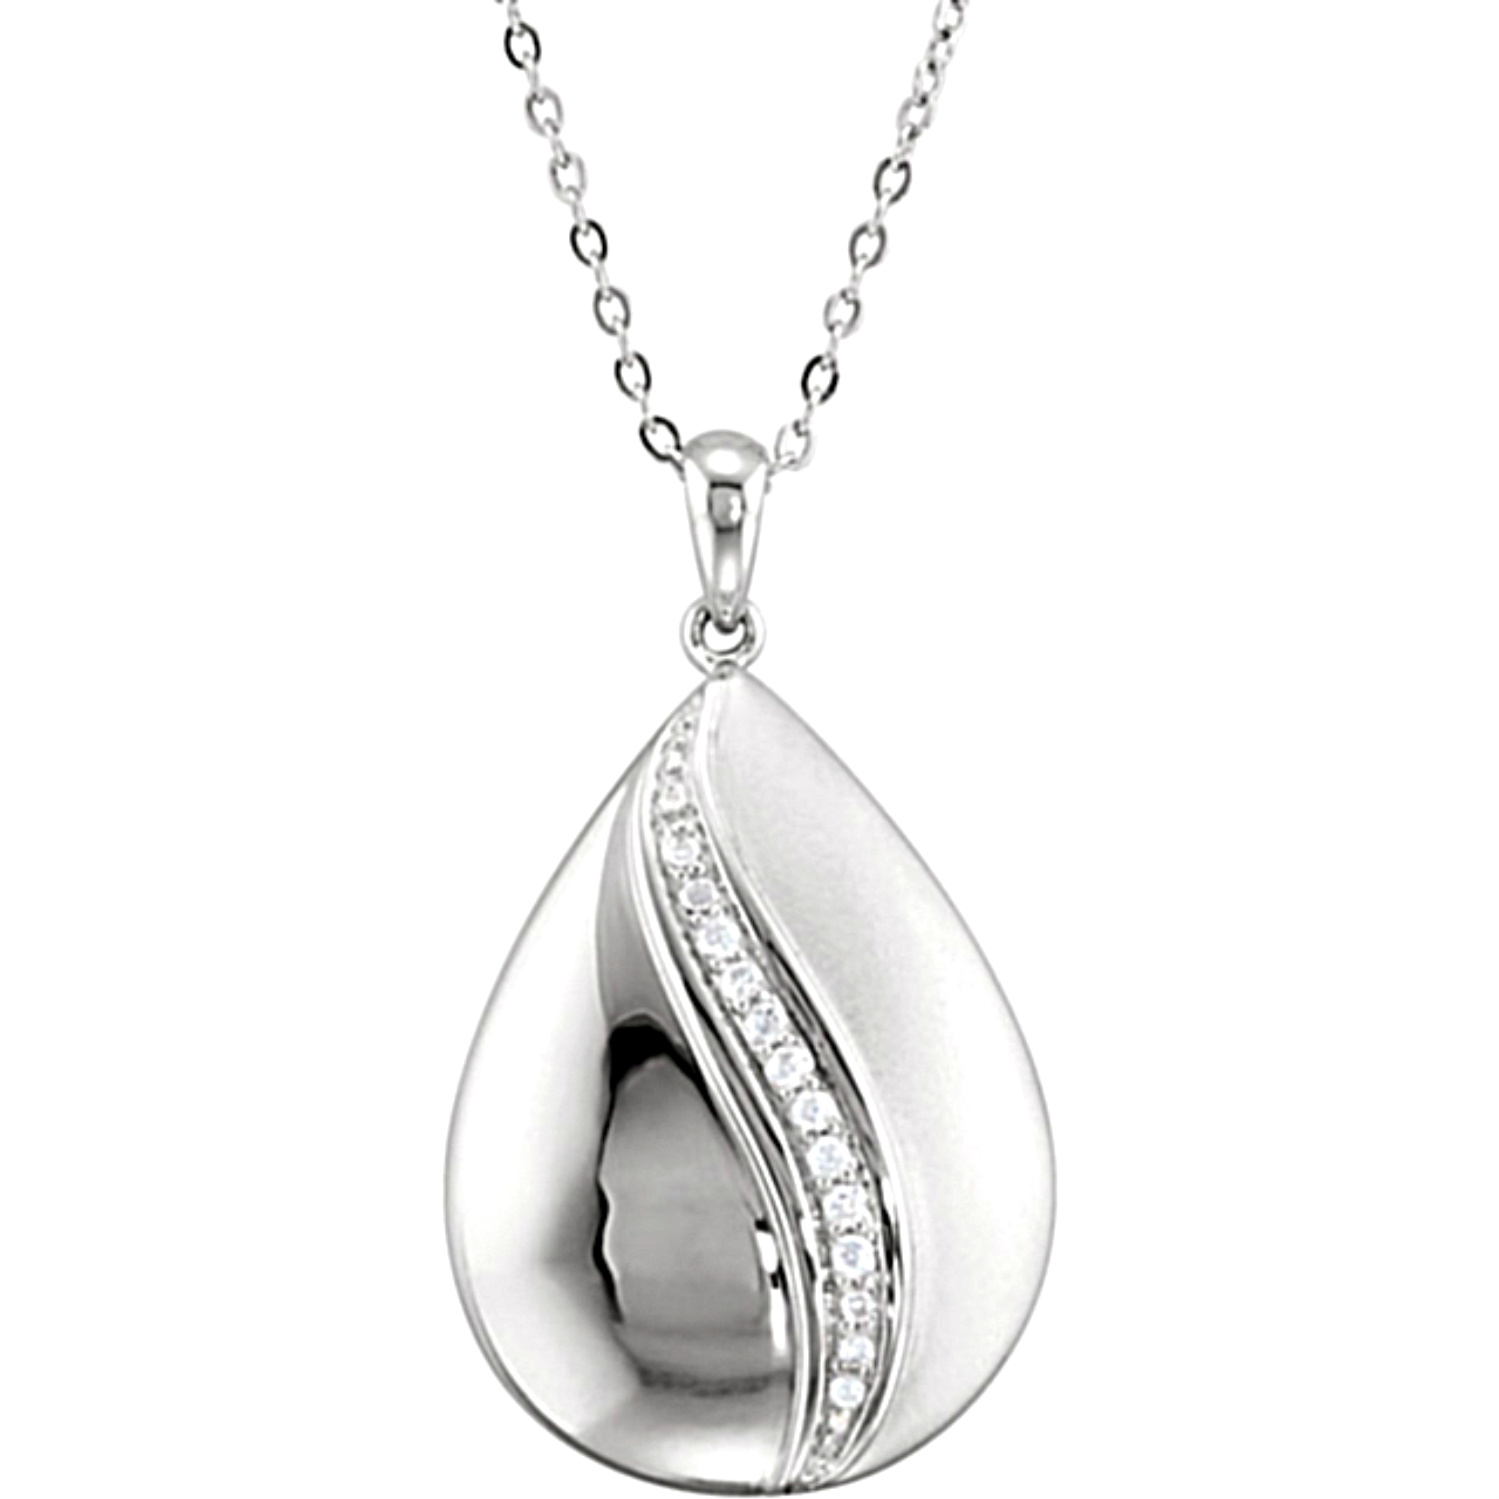 CZ 'Our Father's Comfort' Rhodium Plate Sterling Silver Teardrop Pendant Necklace.